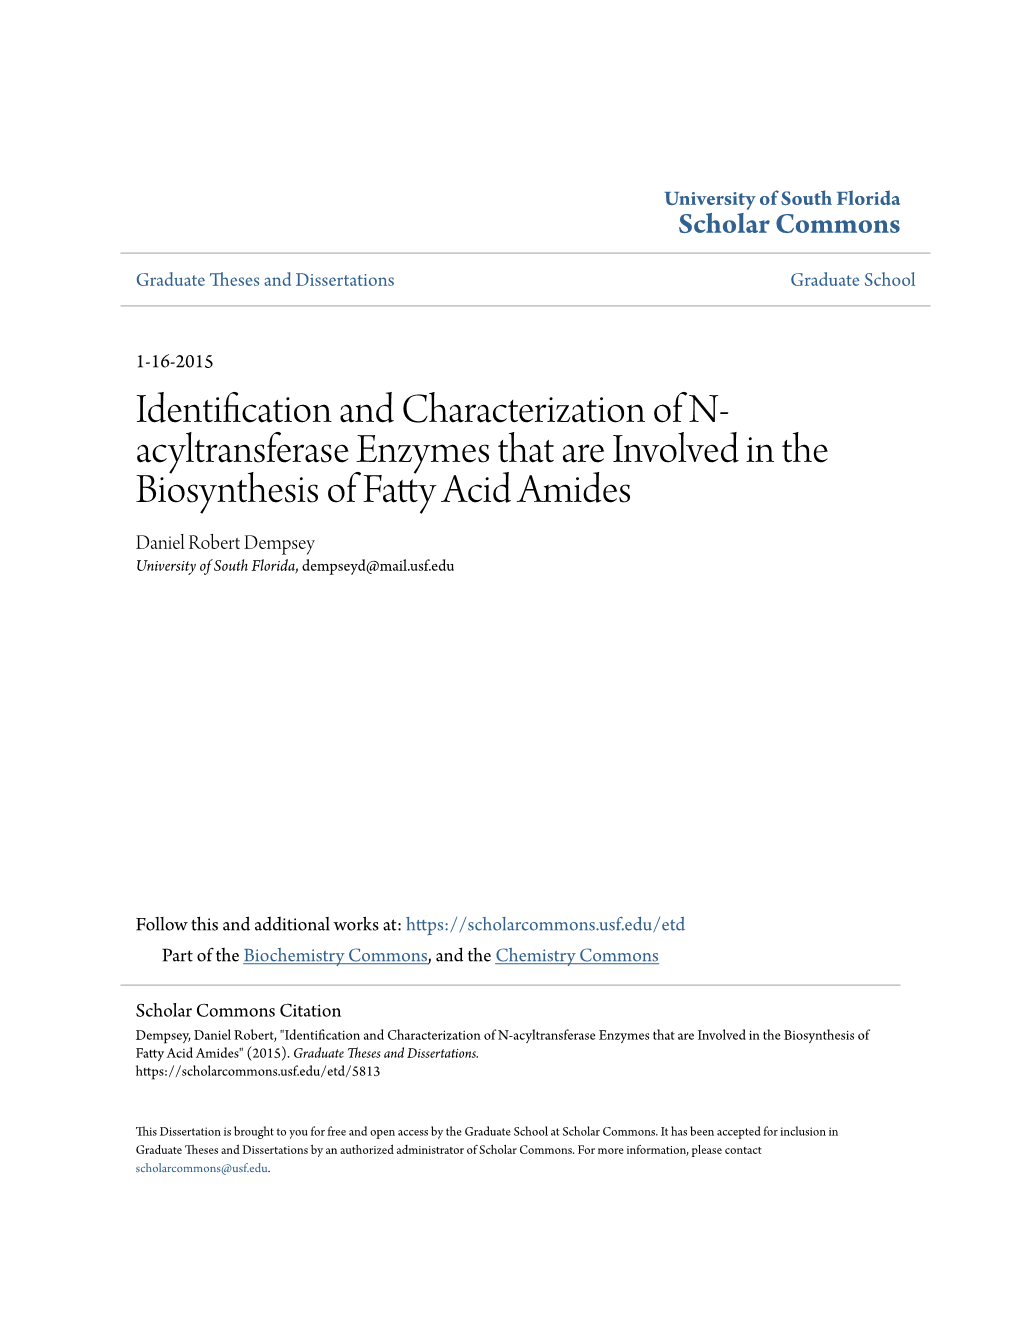 Identification and Characterization of N-Acyltransferase Enzymes That Are Involved in the Biosynthesis of Fatty Acid Amides" (2015)